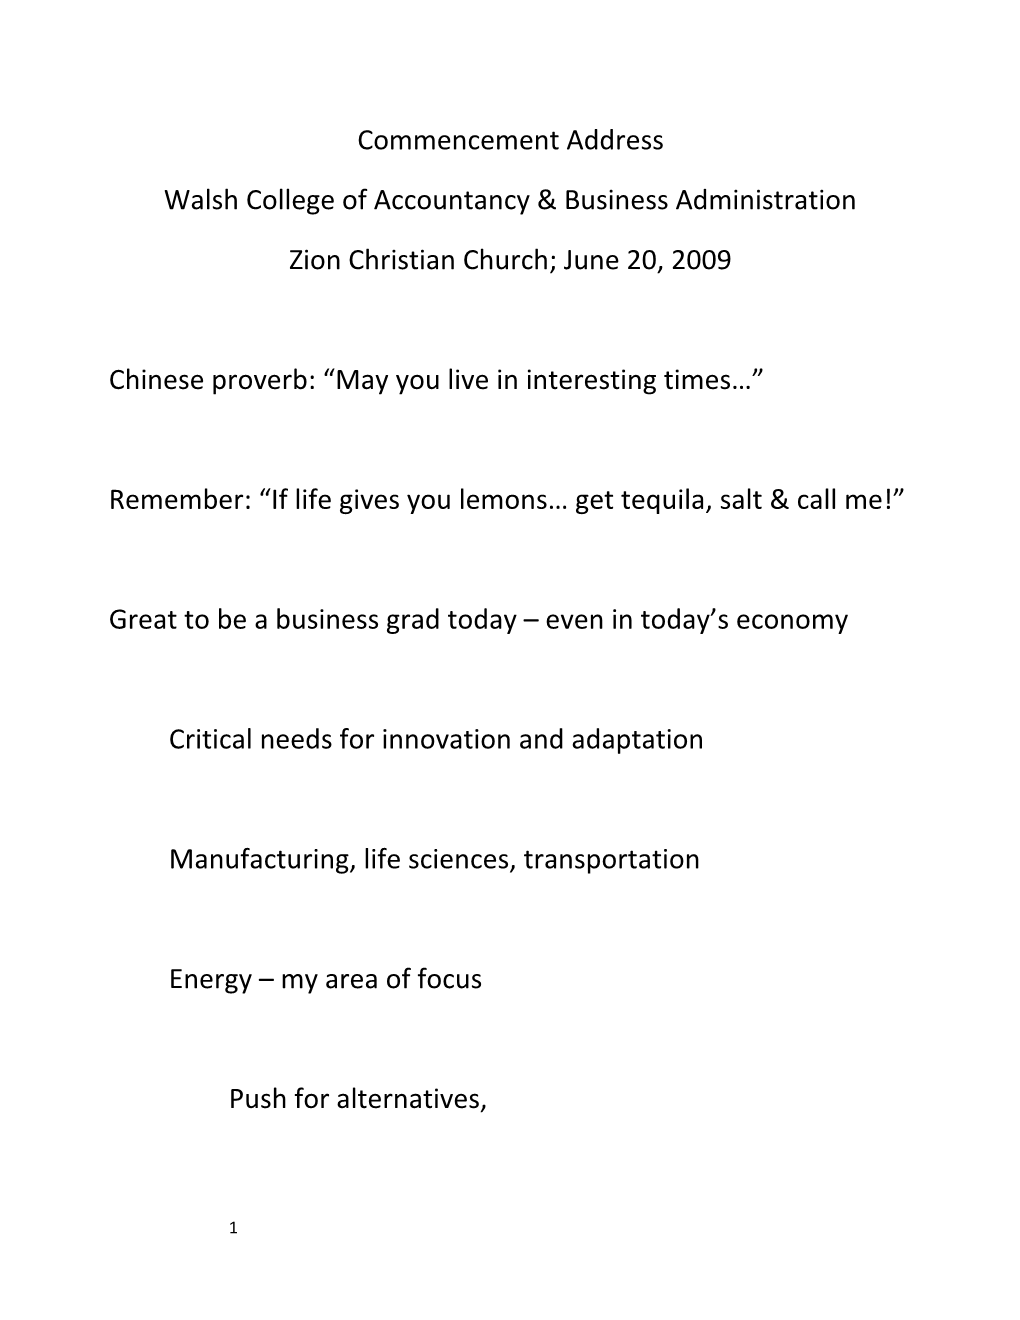 Walsh College of Accountancy & Business Administration